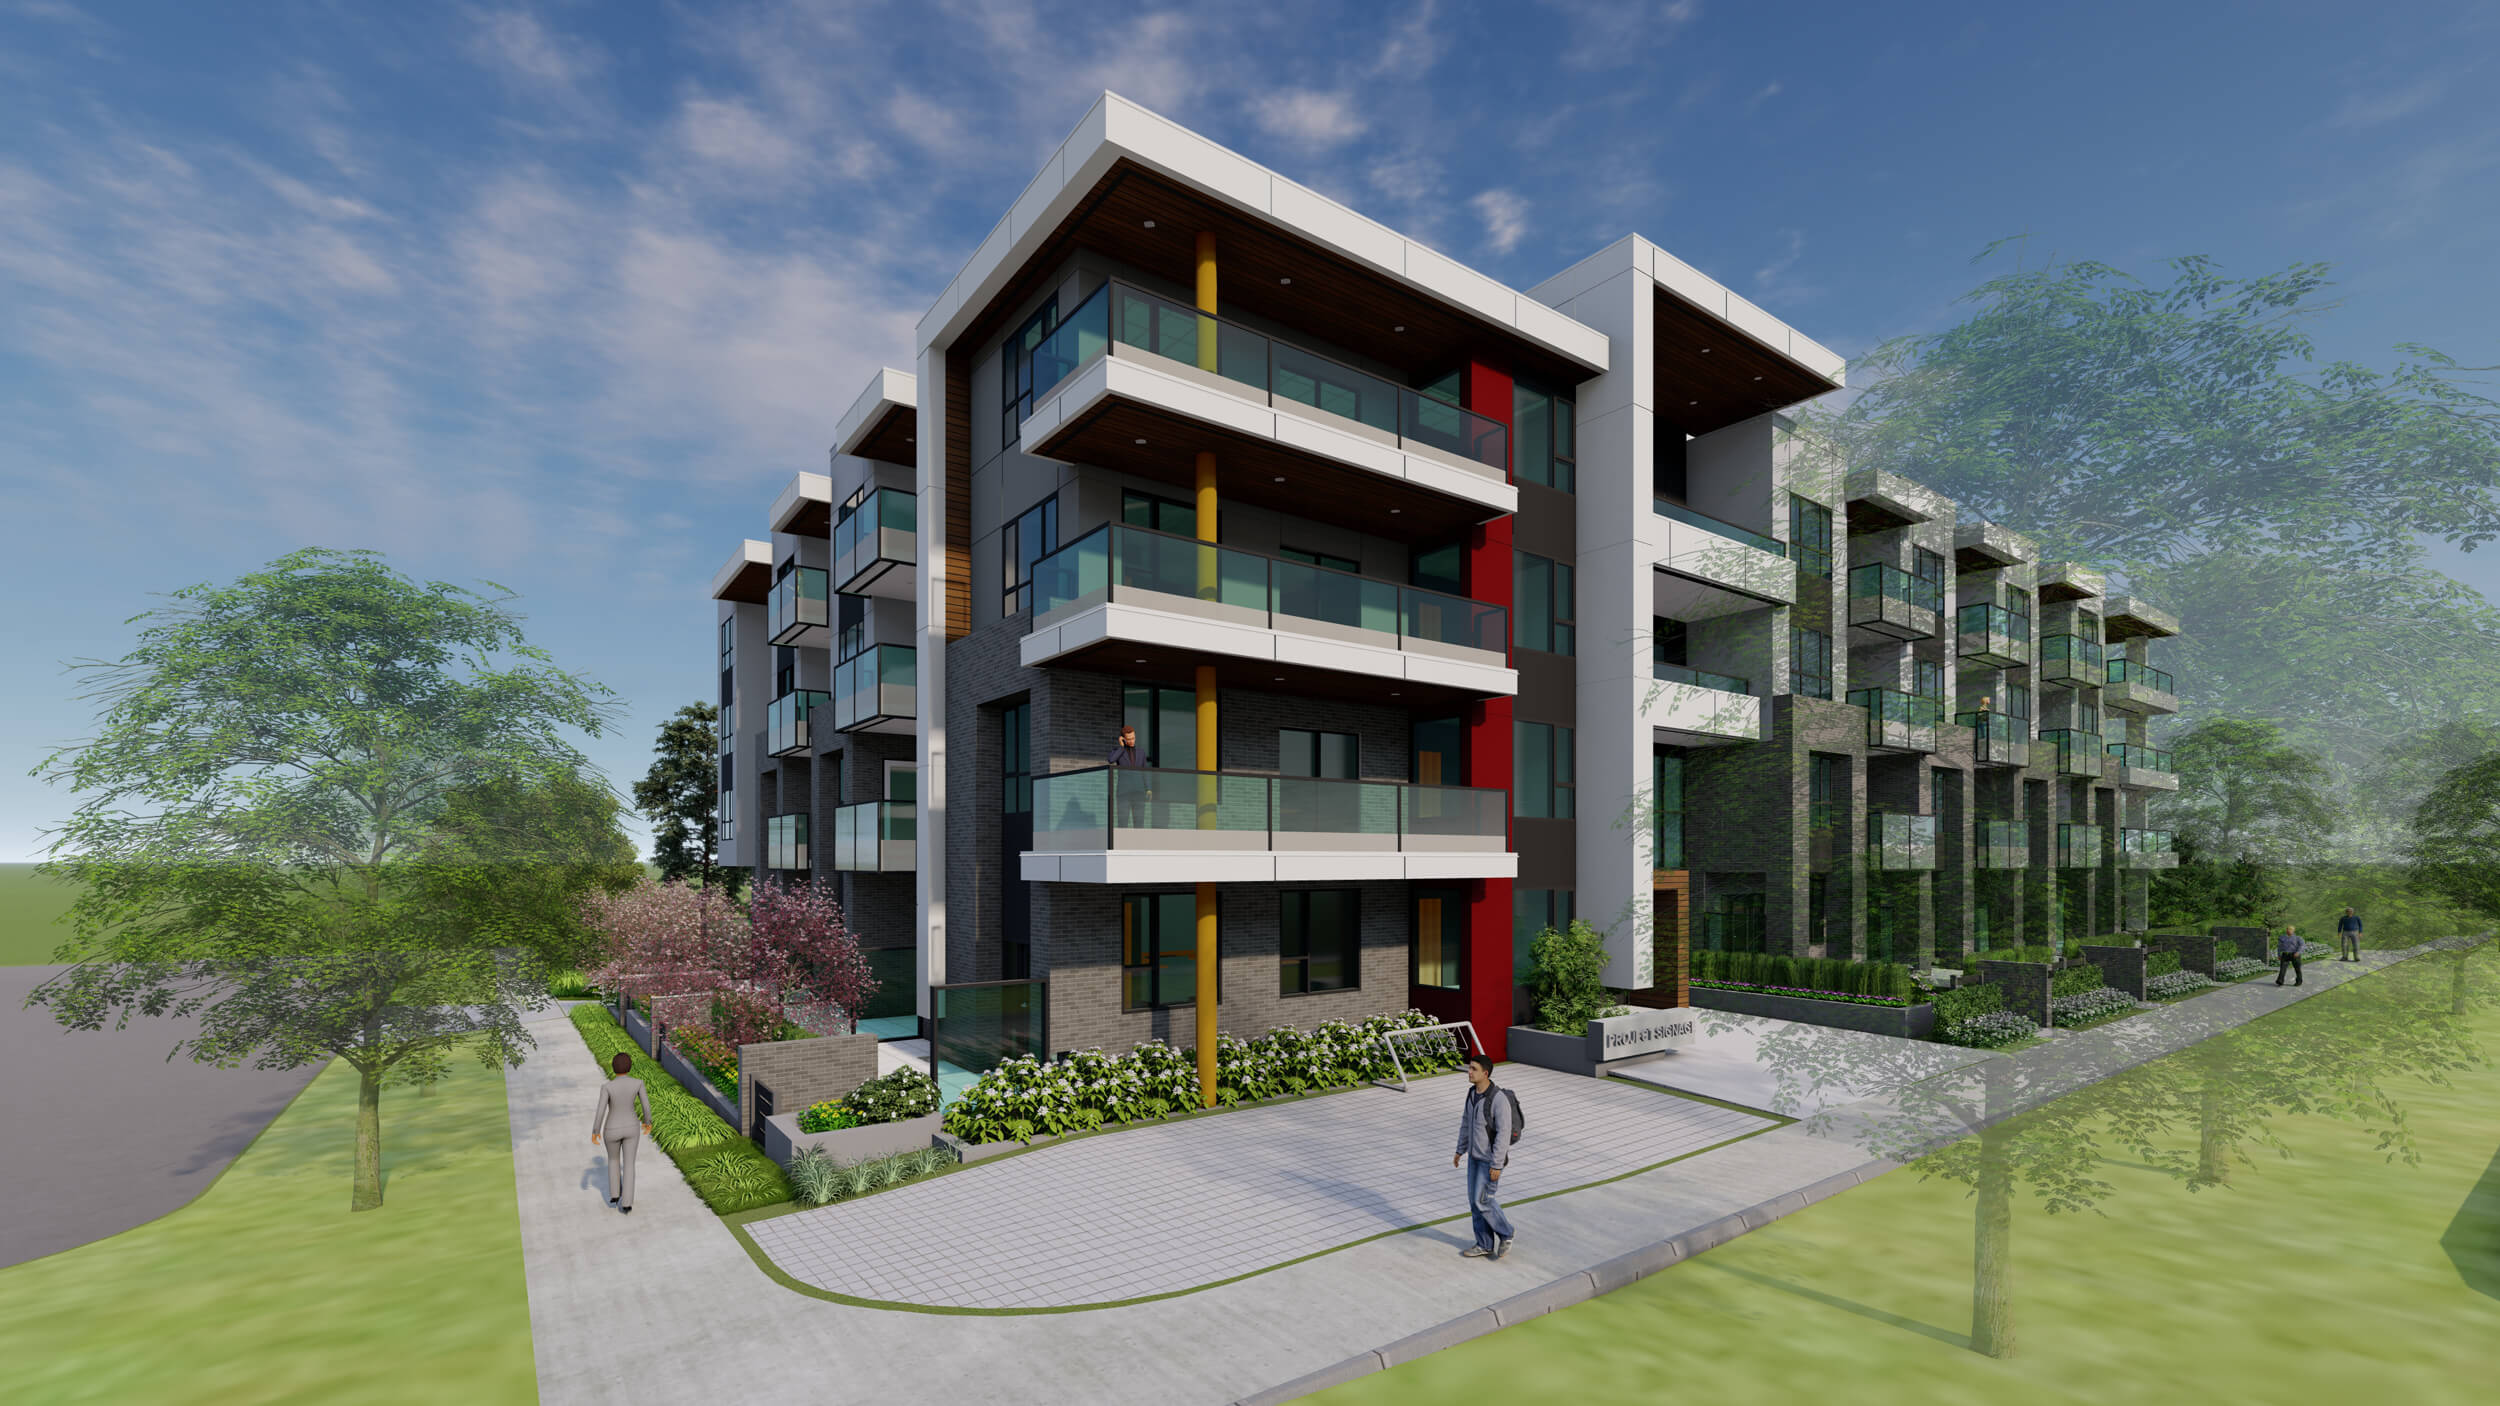 The “154 Avenue” development is a five-storey wood-frame apartment building in Surrey. Design by Group 161 | DF Architecture.